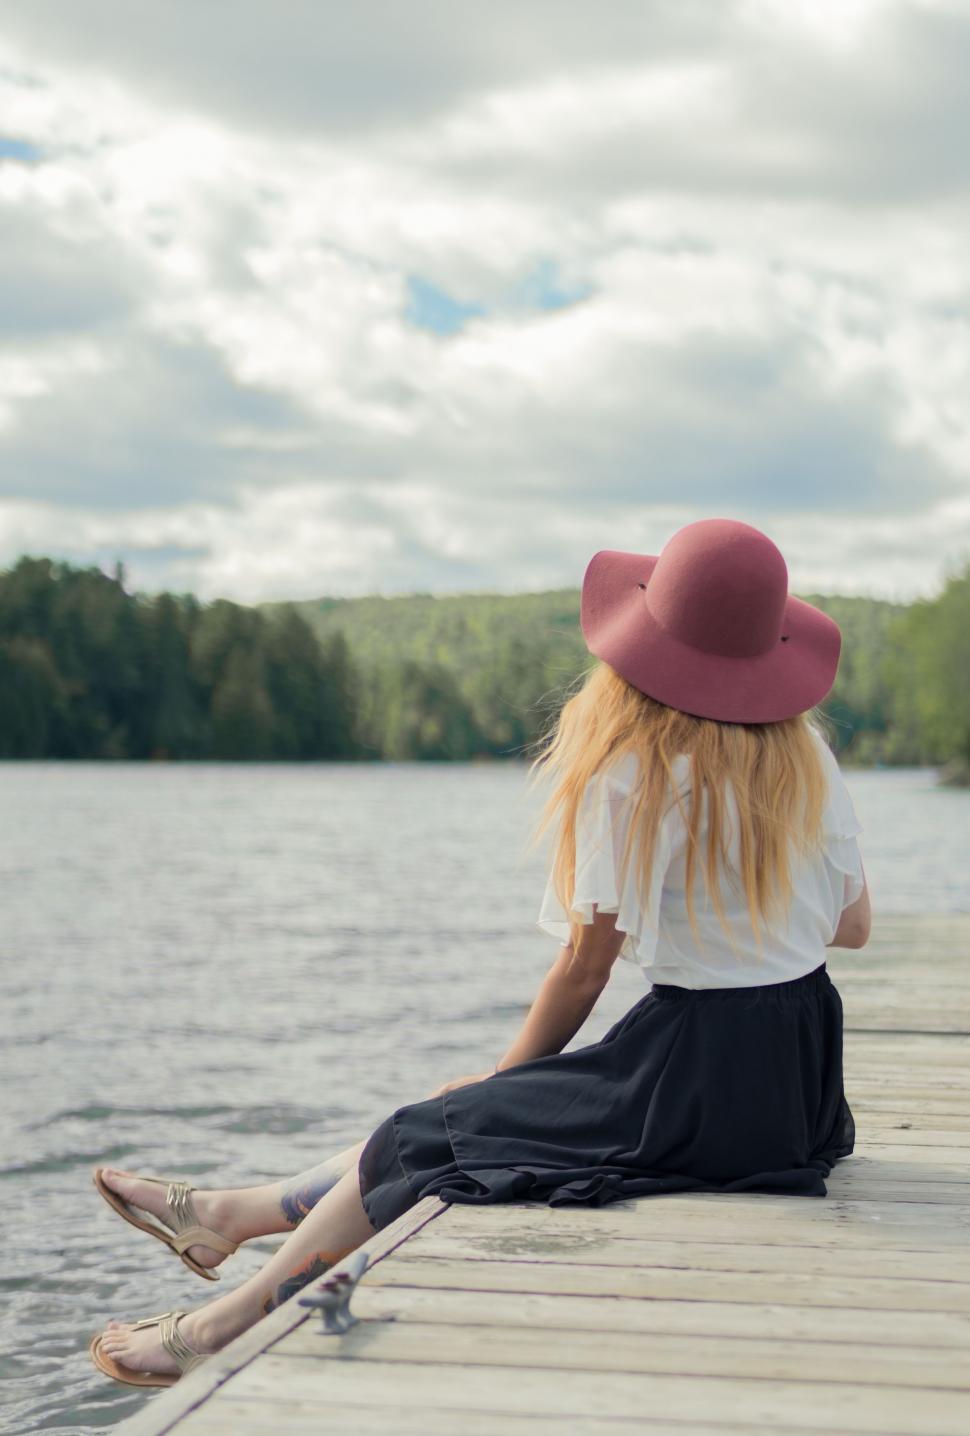 Free Image of Woman Sitting on Dock With Hat 